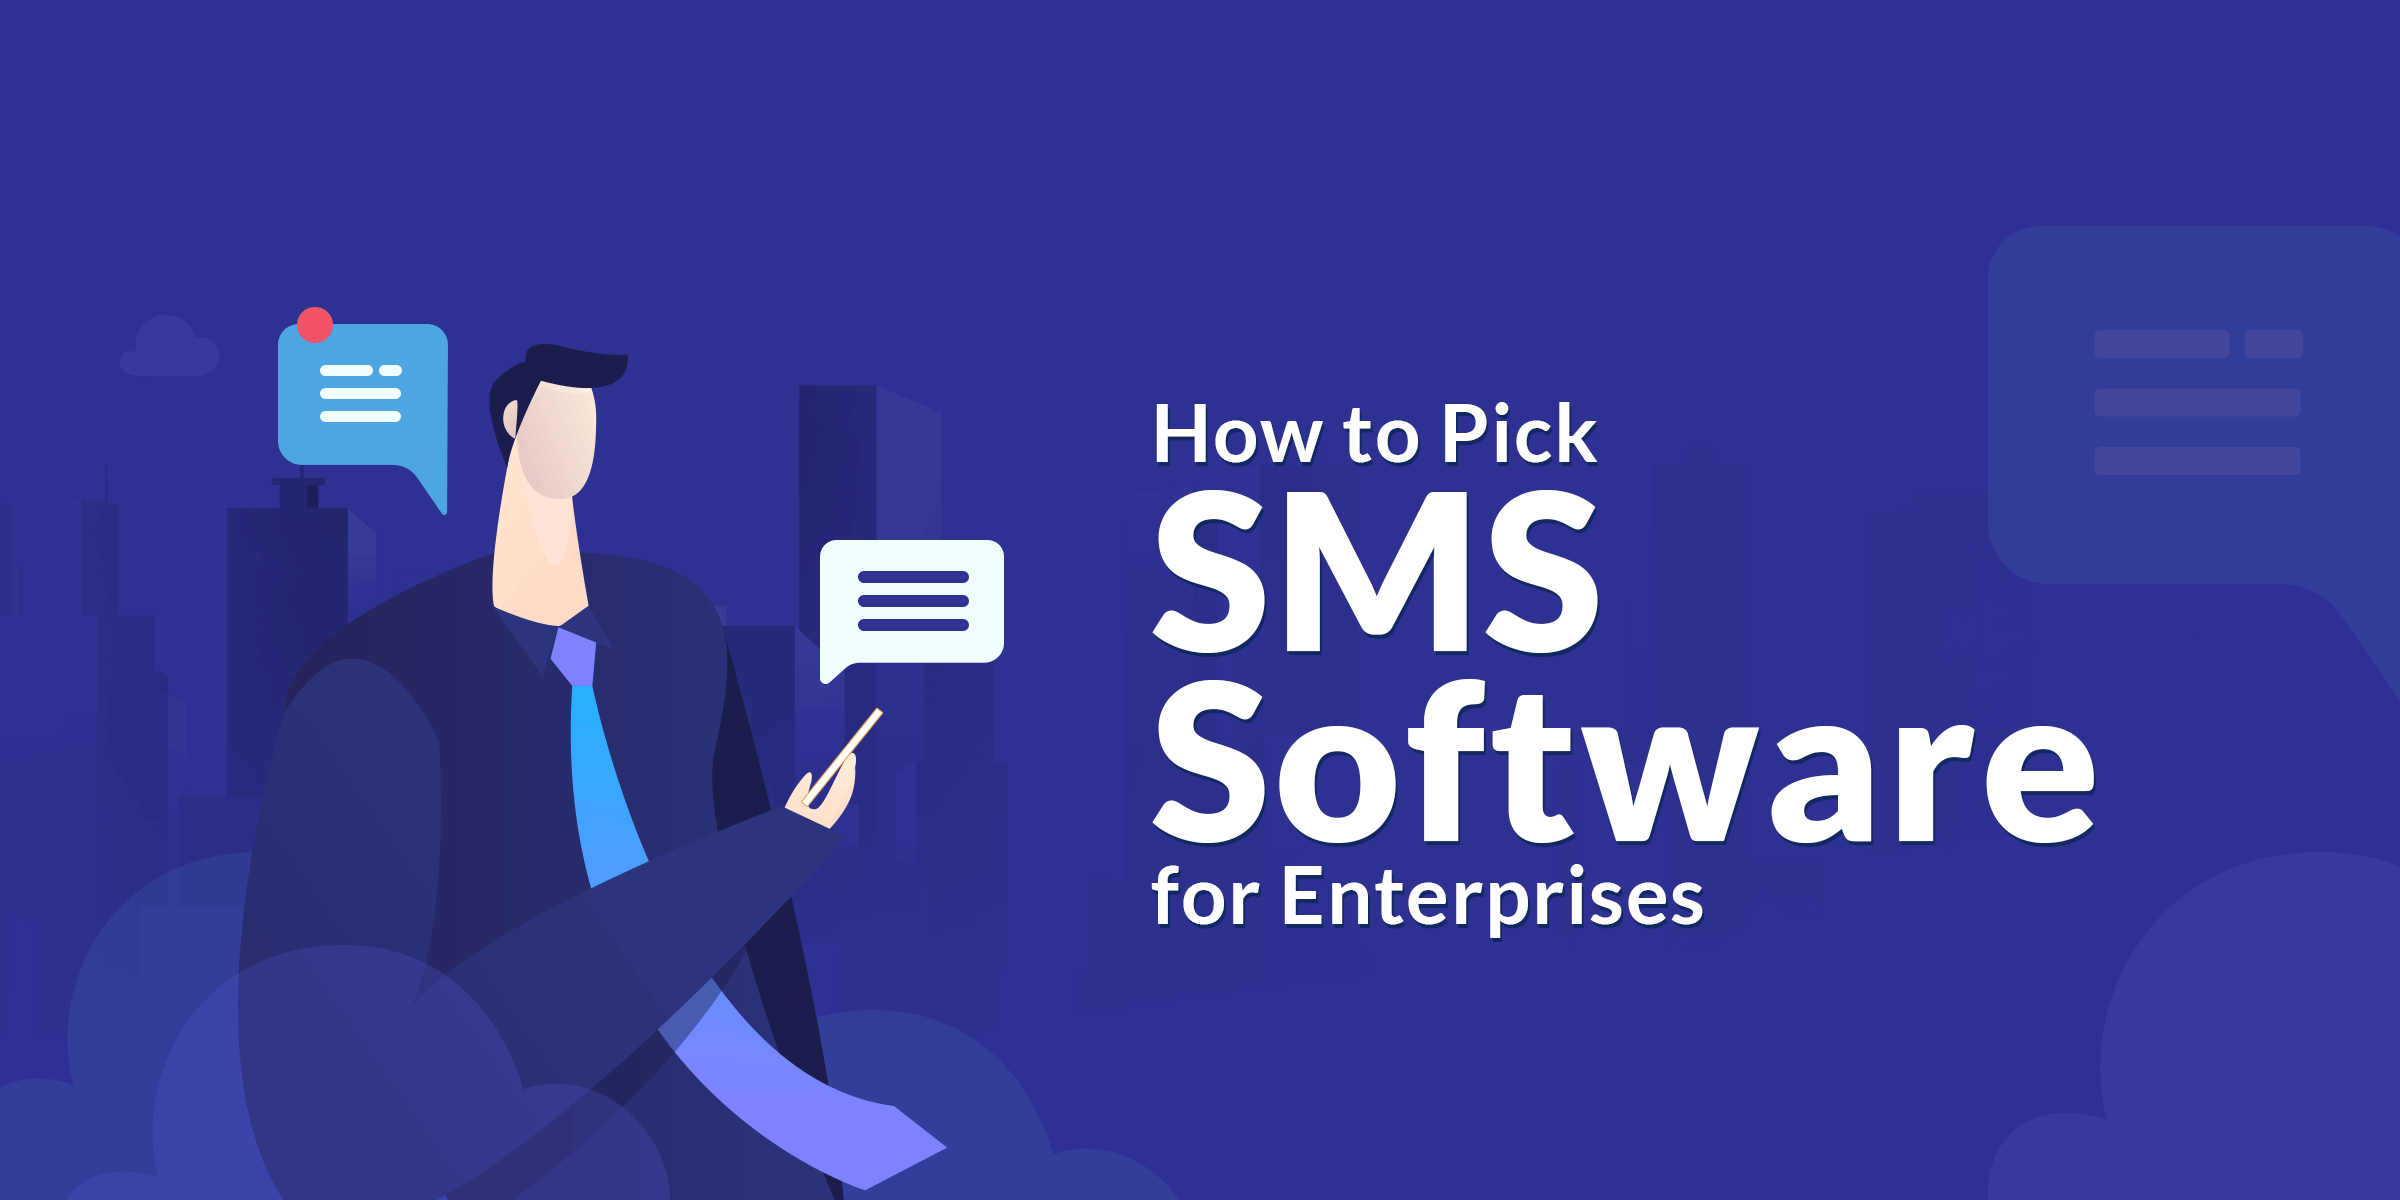 How to Pick SMS Software for Enterprise